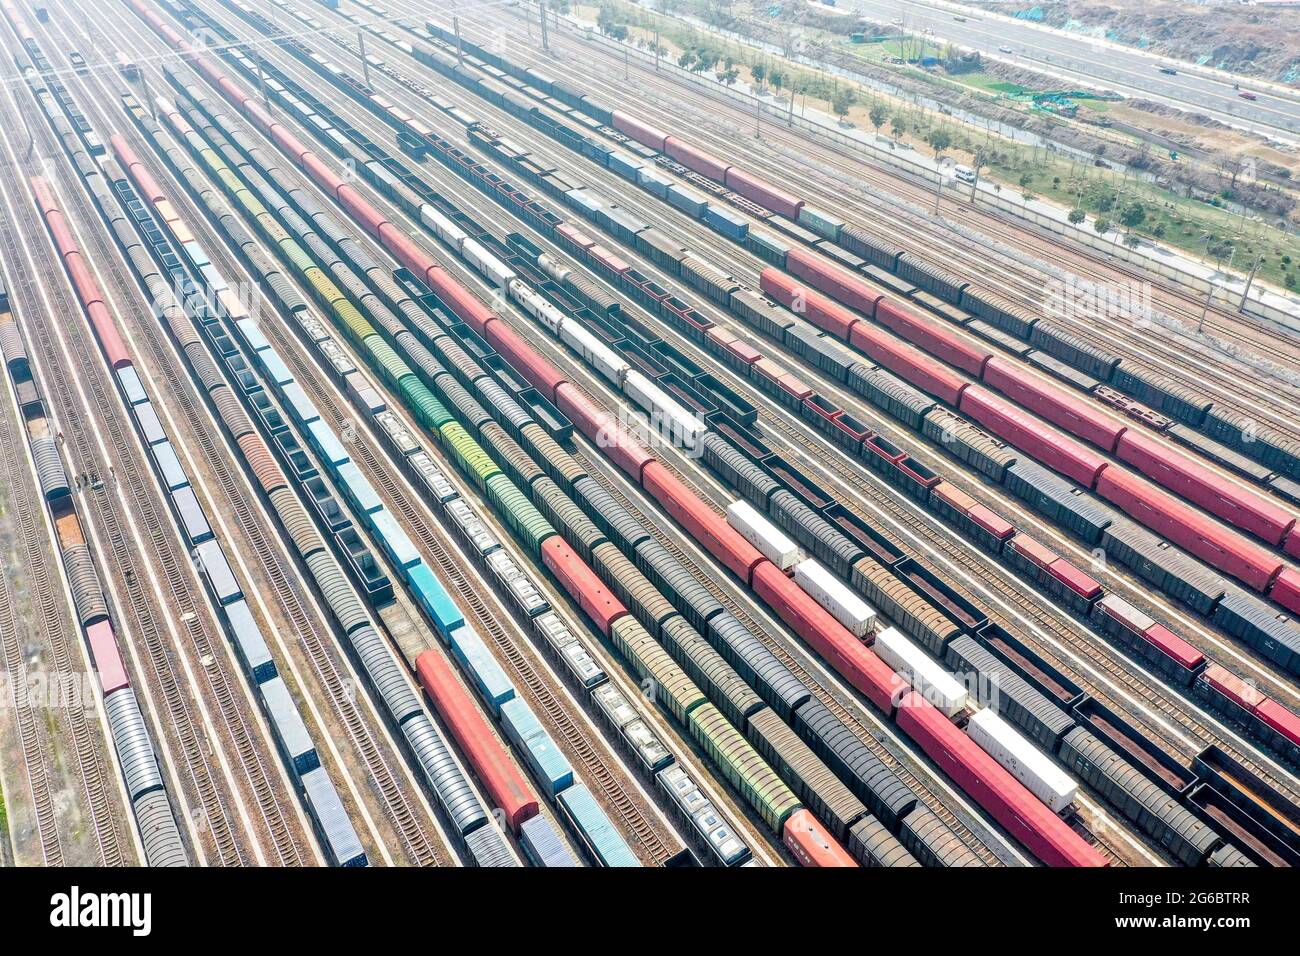 July 5, 2021, Zhengzhou, Zhengzhou, China: On July 3, 2021, Zhengzhou City, Henan Province, aerial photographs of freight cars at the railway marshalling station of Zhengzhou North Railway Station.....Zhengzhou North Railway Station is a special-class station under the jurisdiction of China Railway Zhengzhou Bureau Group Co., Ltd., and an important station connecting Beijing-Guangzhou Railway and Longhai Railway. Construction started in 1959 and completed and put into use in 1963. It mainly handles the arrival, disassembly, marshalling, and departure tasks of freight trains on the Beijing-Guan Stock Photo